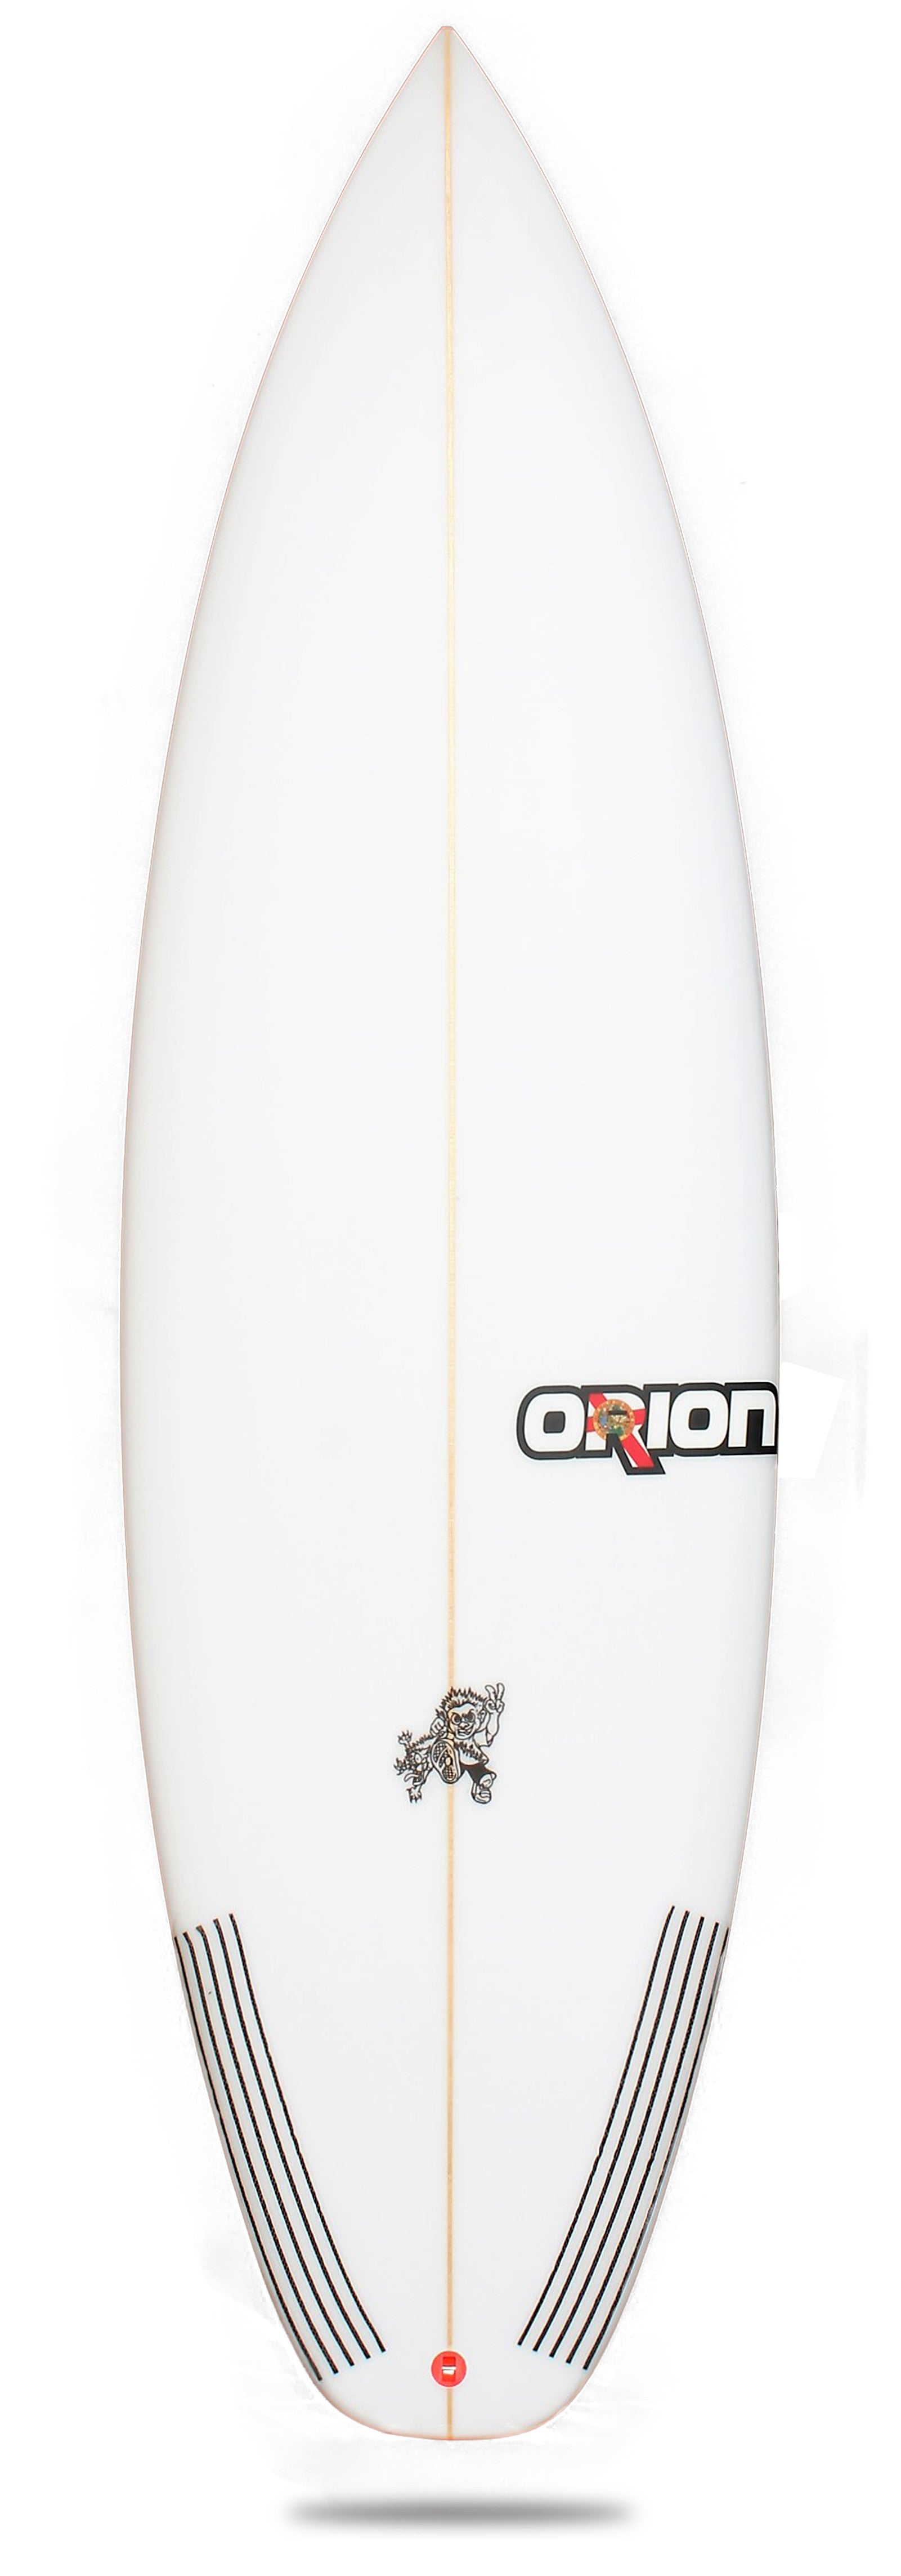 Orion Surfboards Menace 2 Tri-Fin FCS2 5ft11in